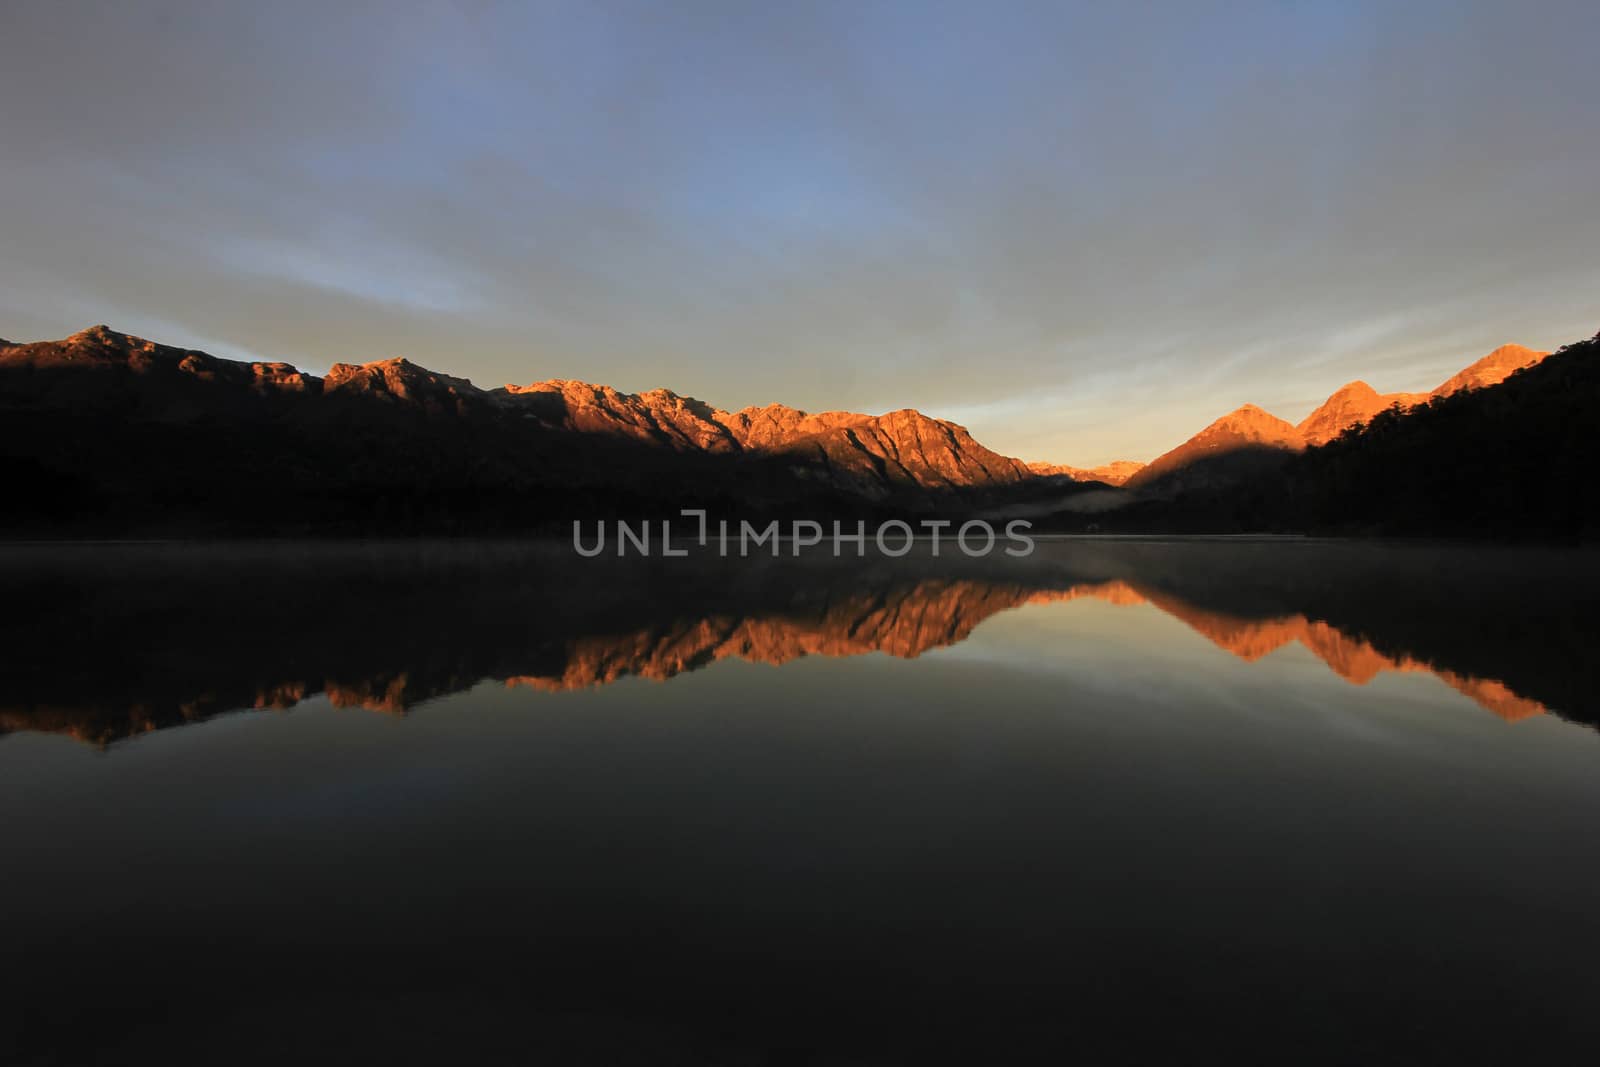 Sunrise at Lake Totoral in autumn, Argentina by cicloco